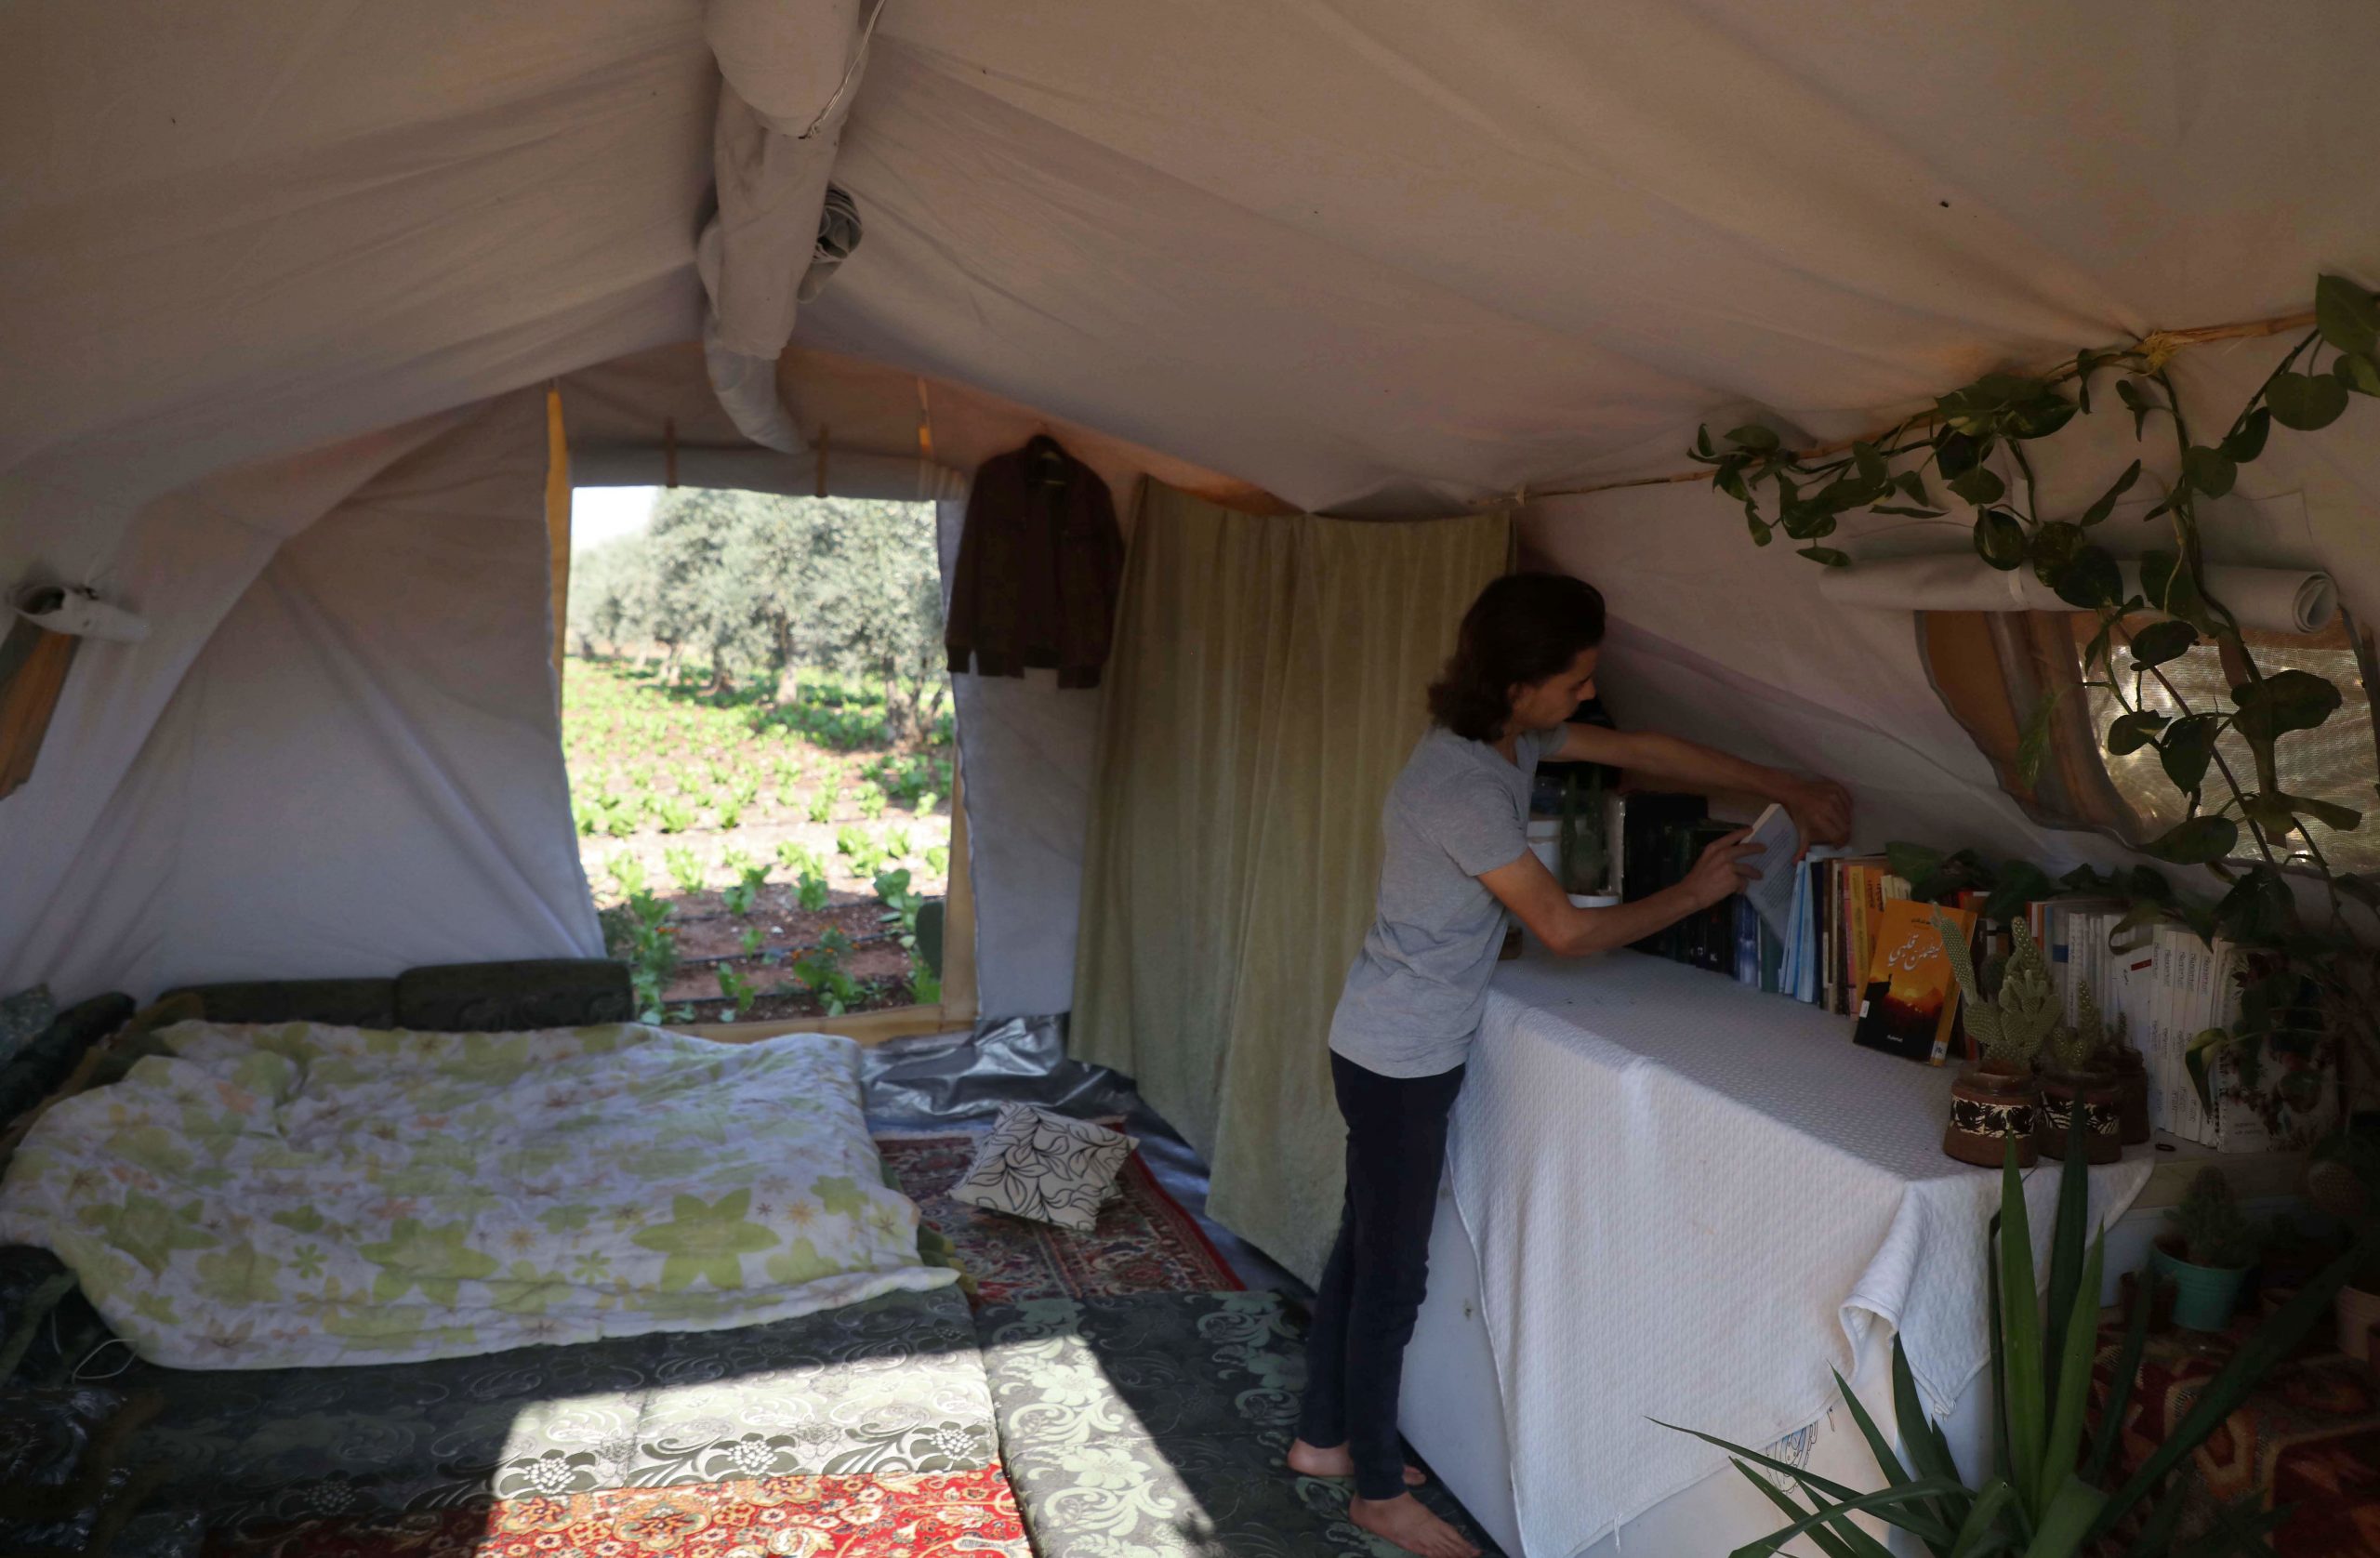 Tent and garden: Displaced Syria teen recreates lost family home